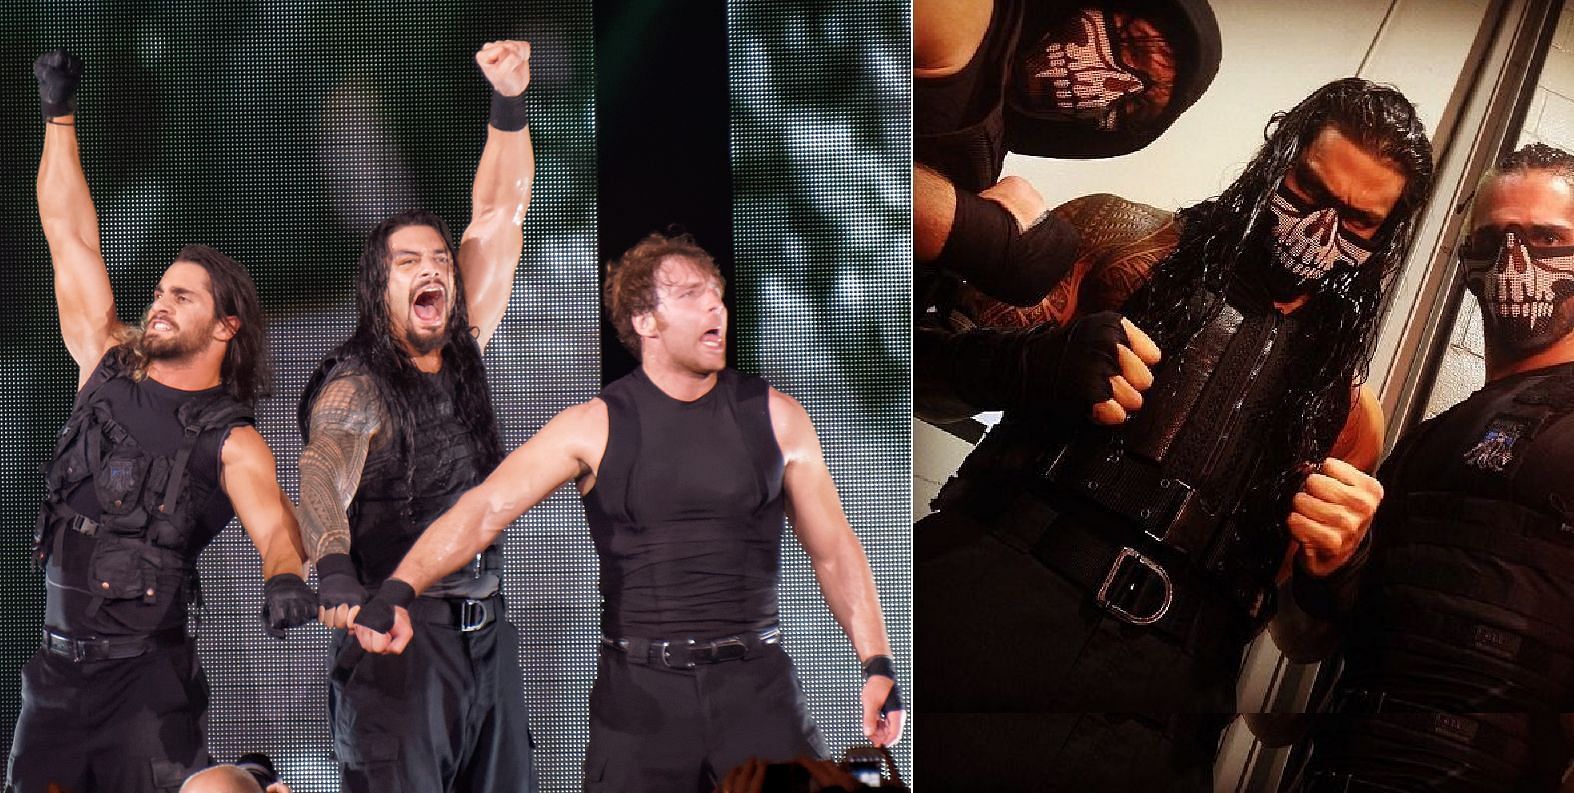 Drew McIntyre has referenced The Shield